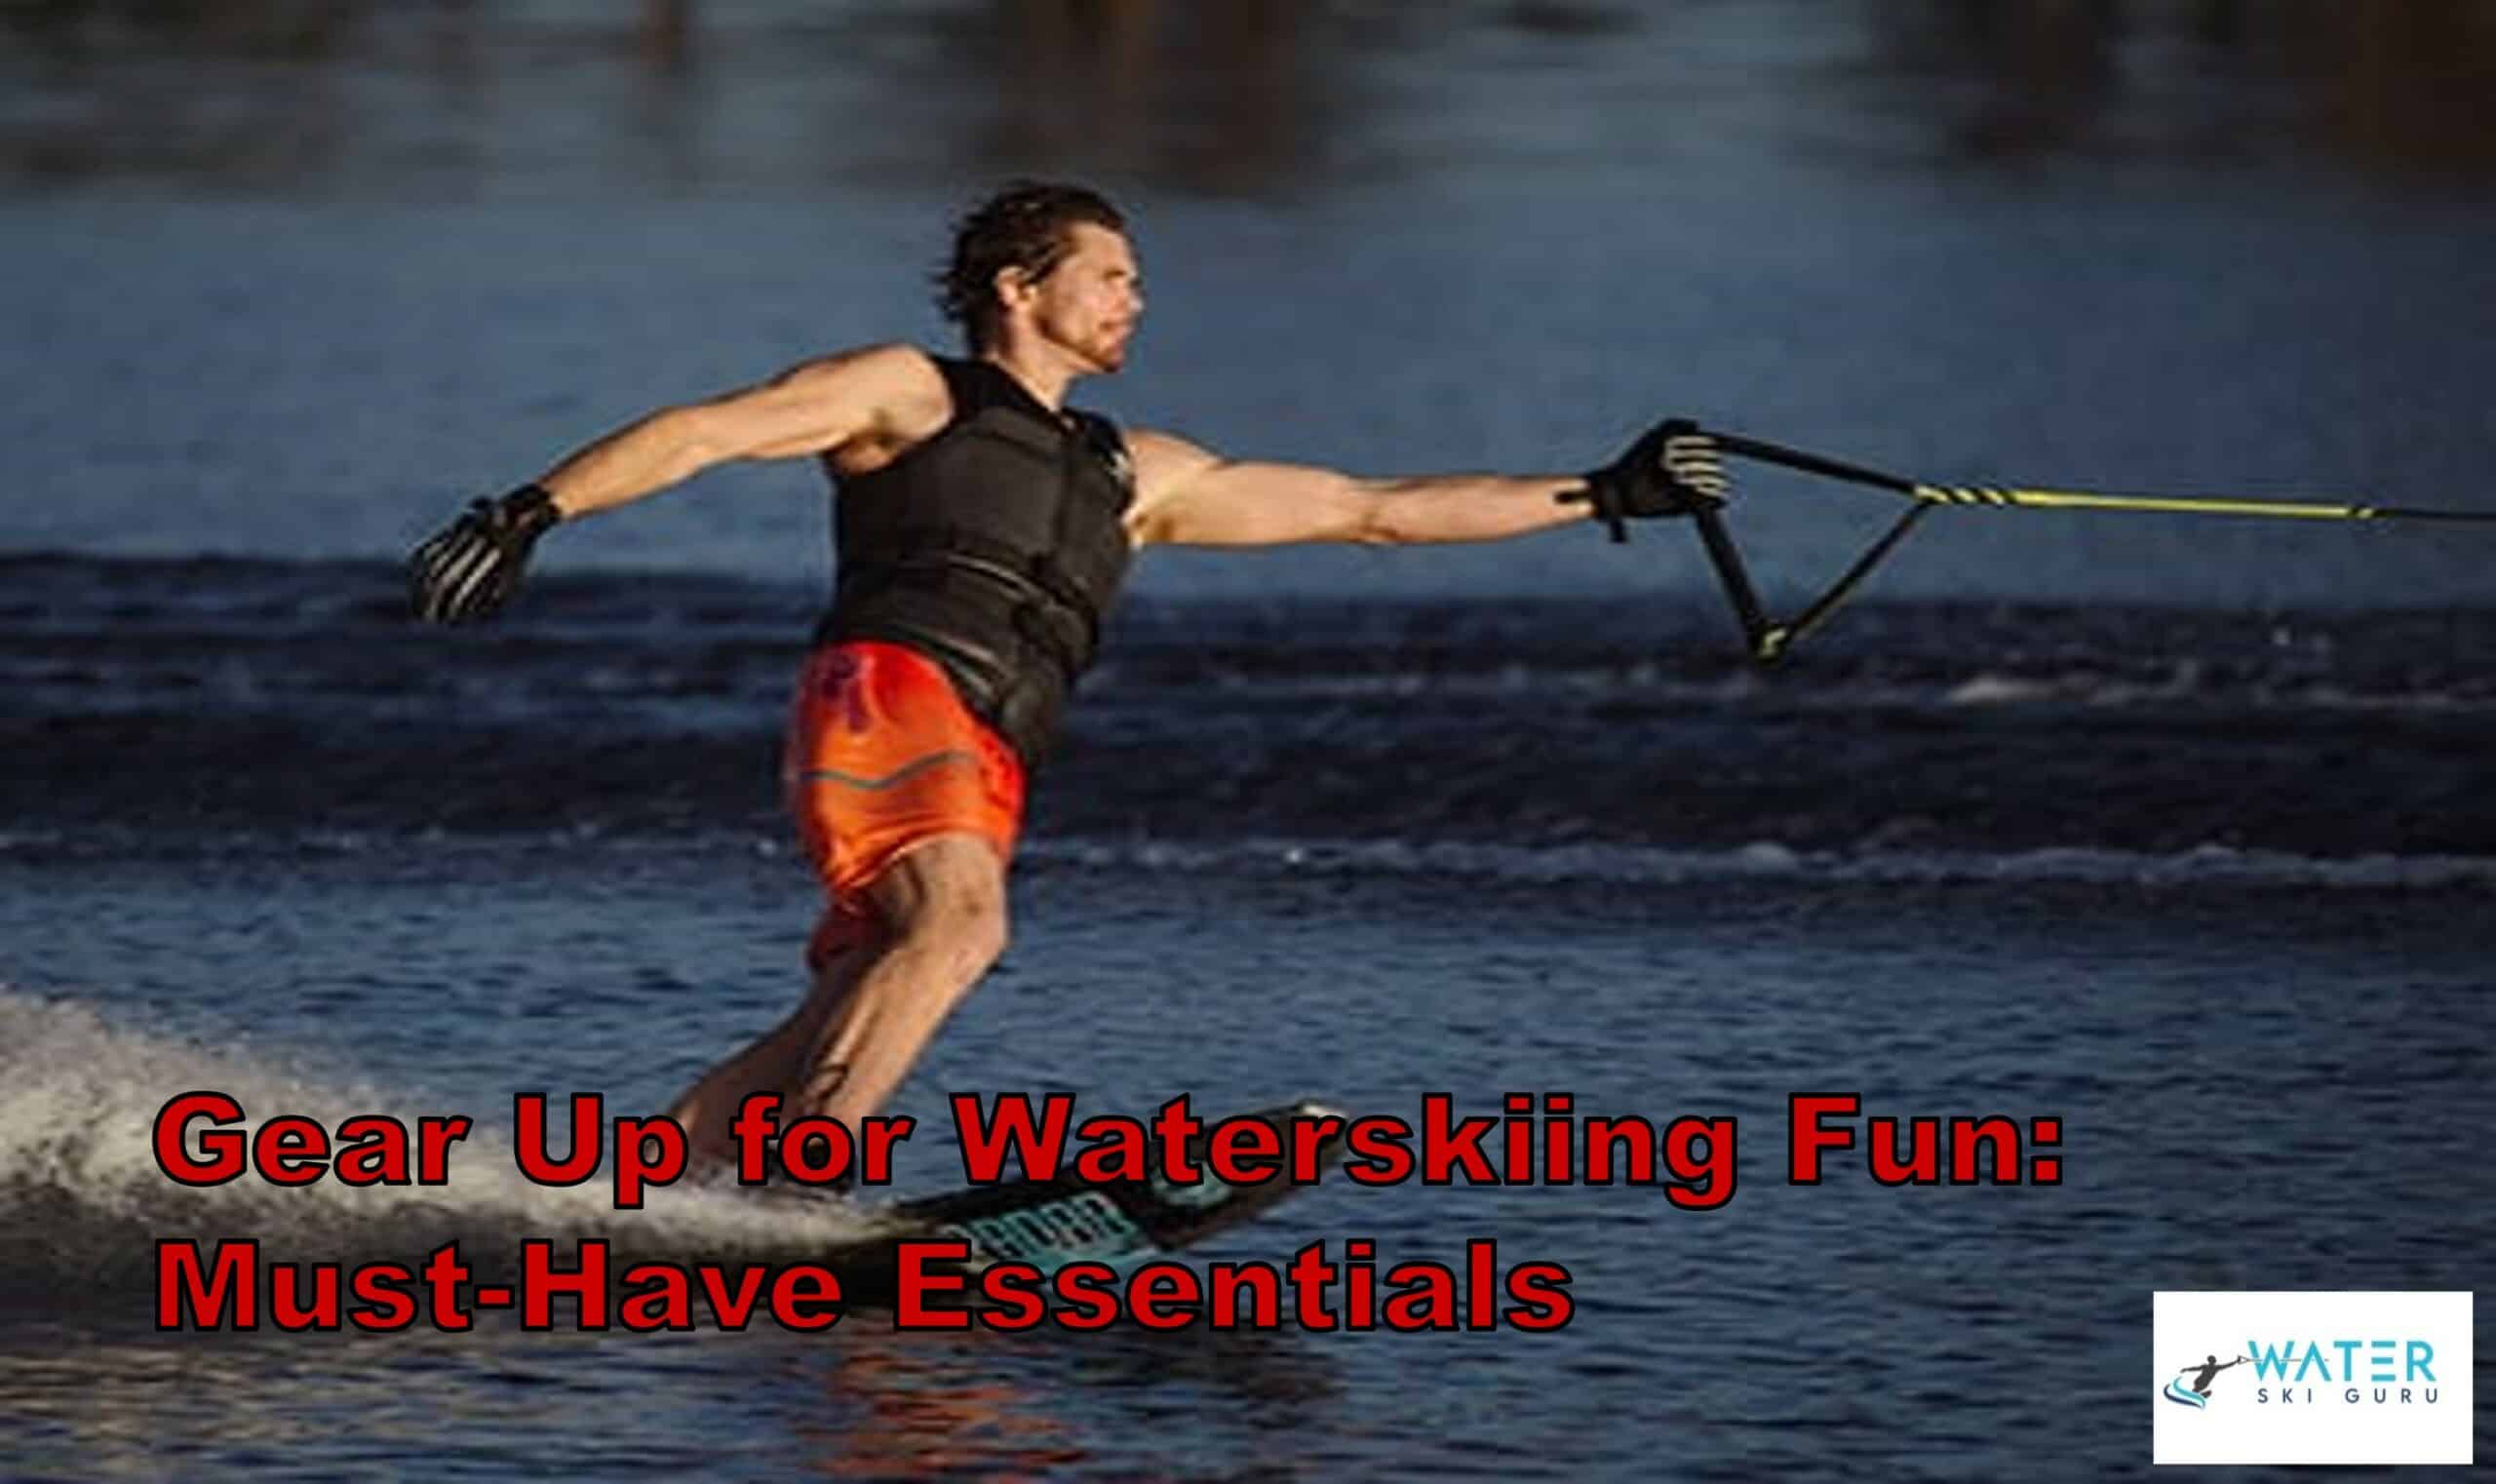 Gear Up For Waterskiing Fun: Must-Have Essentials